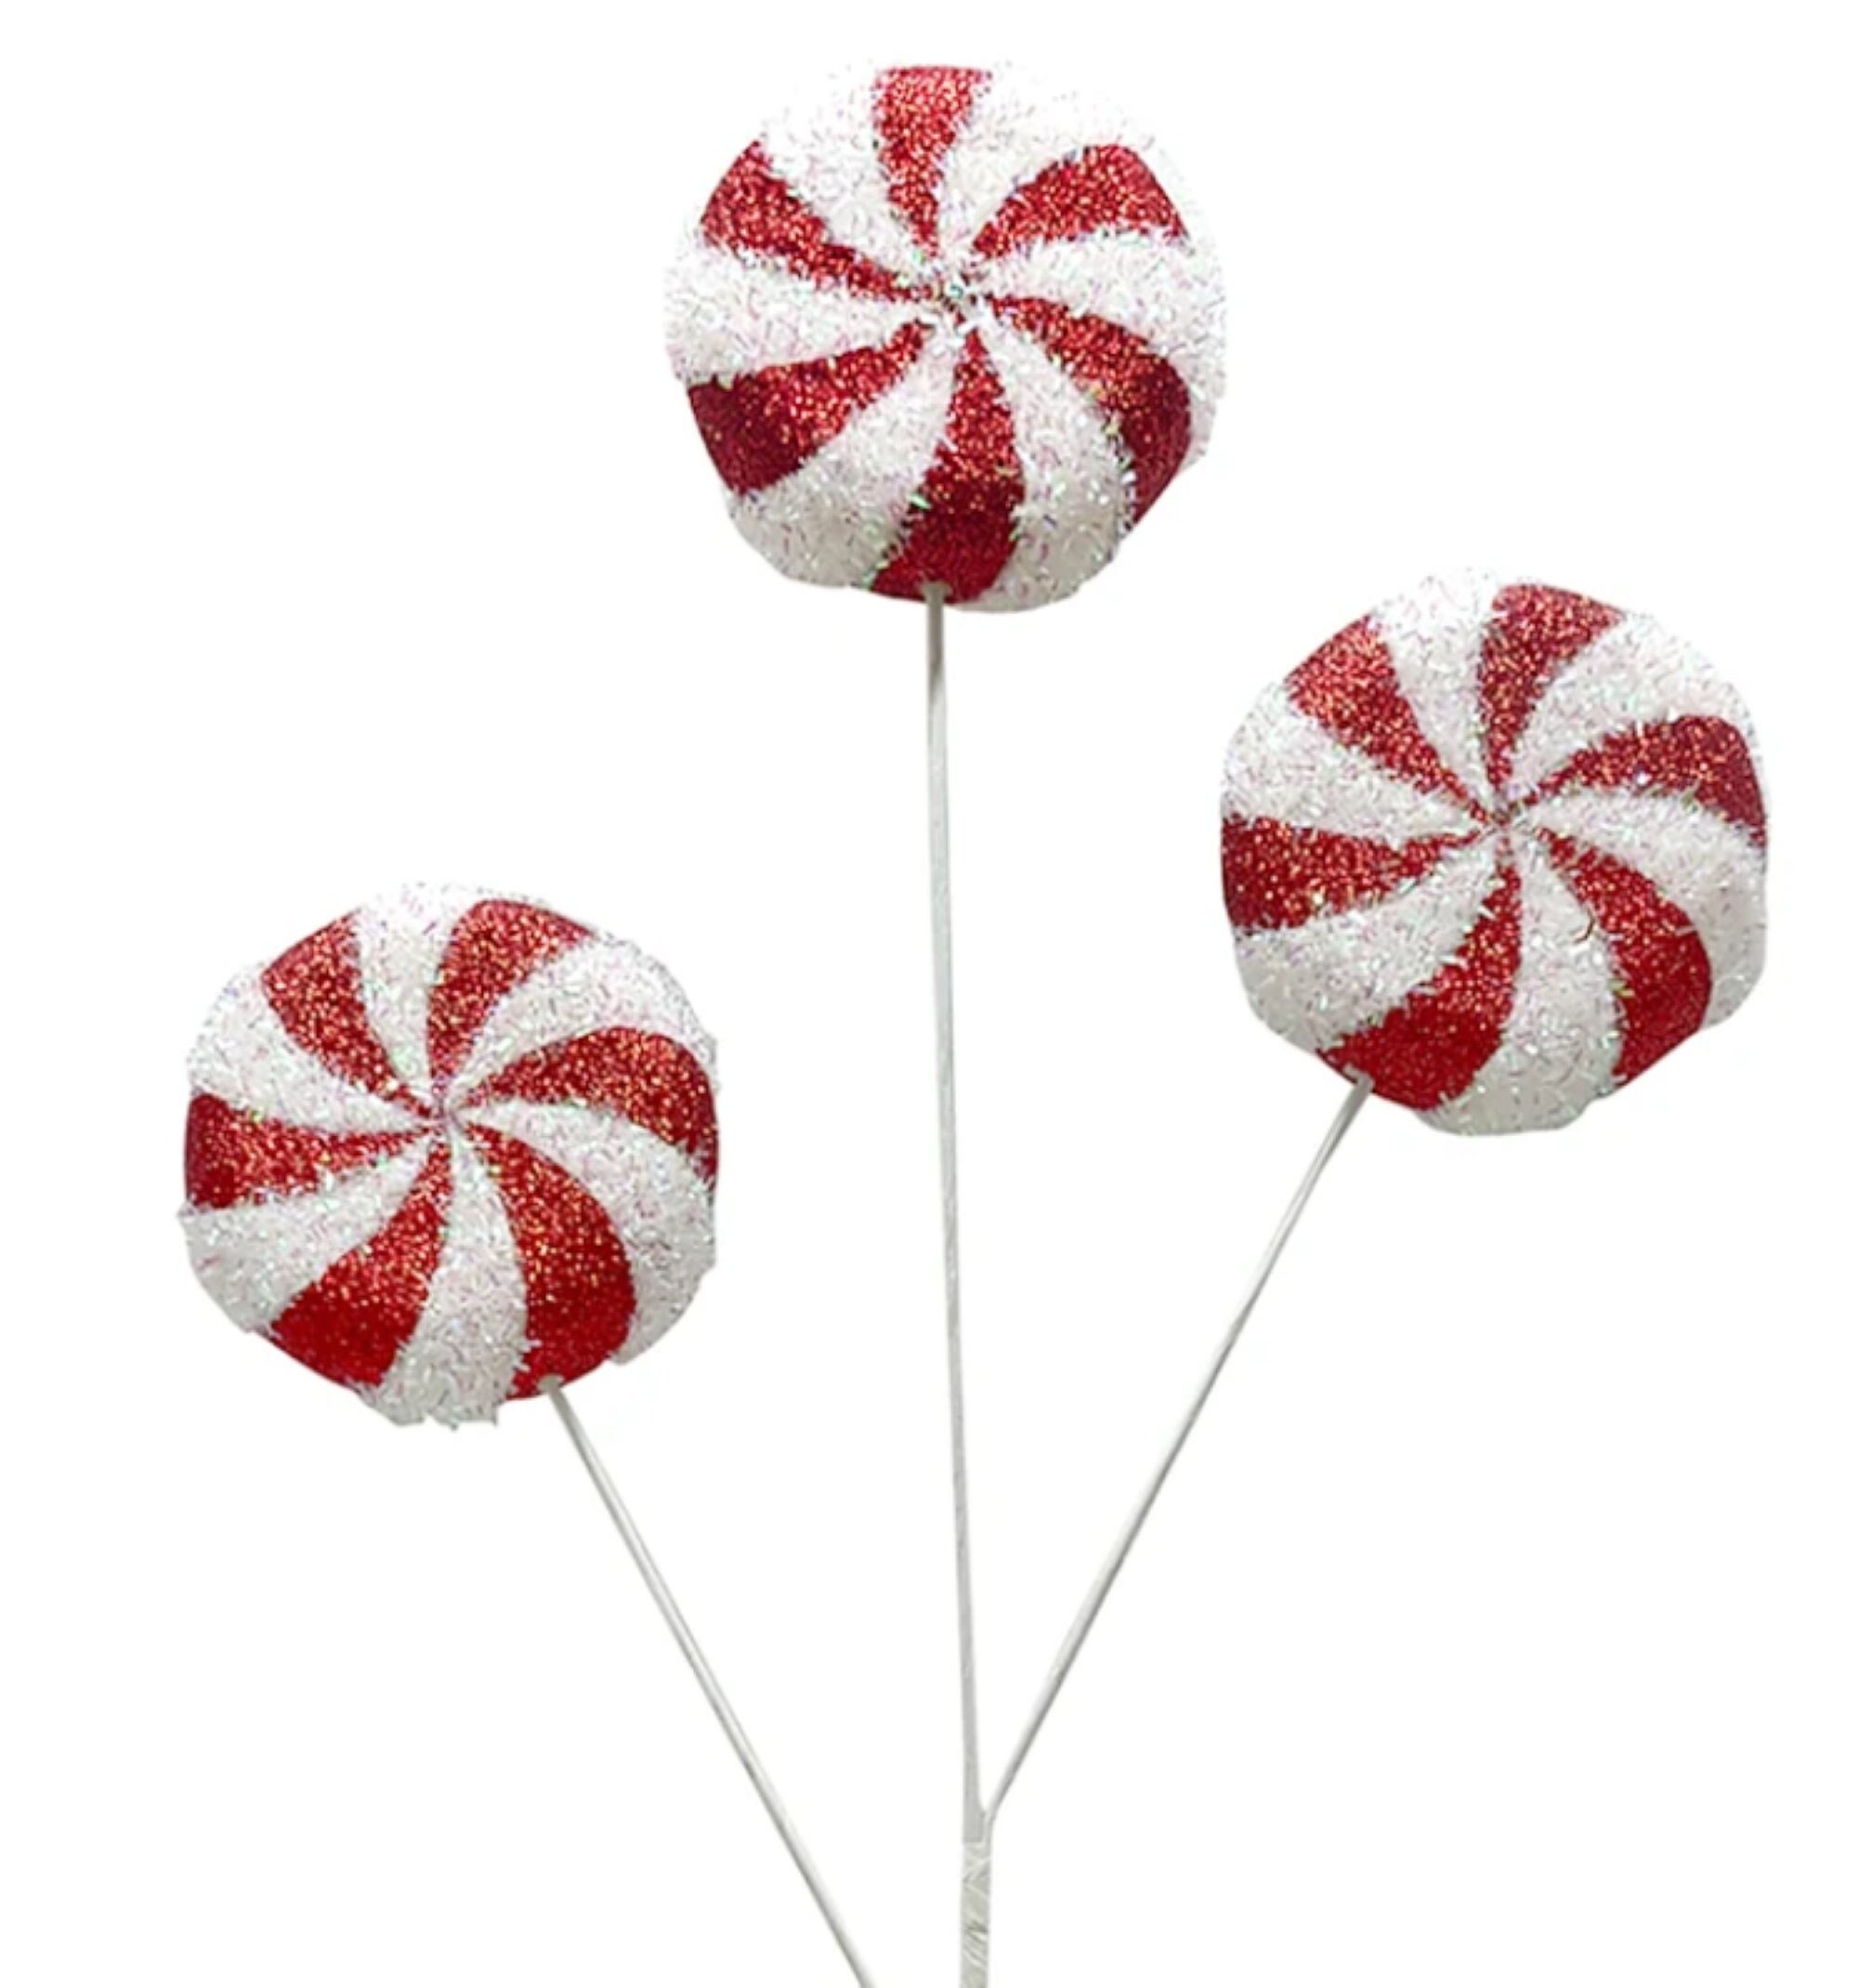 Christmas Picks and Sprays, Christmas Candy Ornaments, Lollipops,  Peppermint Decor, Christmas Craft Supplies, Wreath, Peppermint Pick 